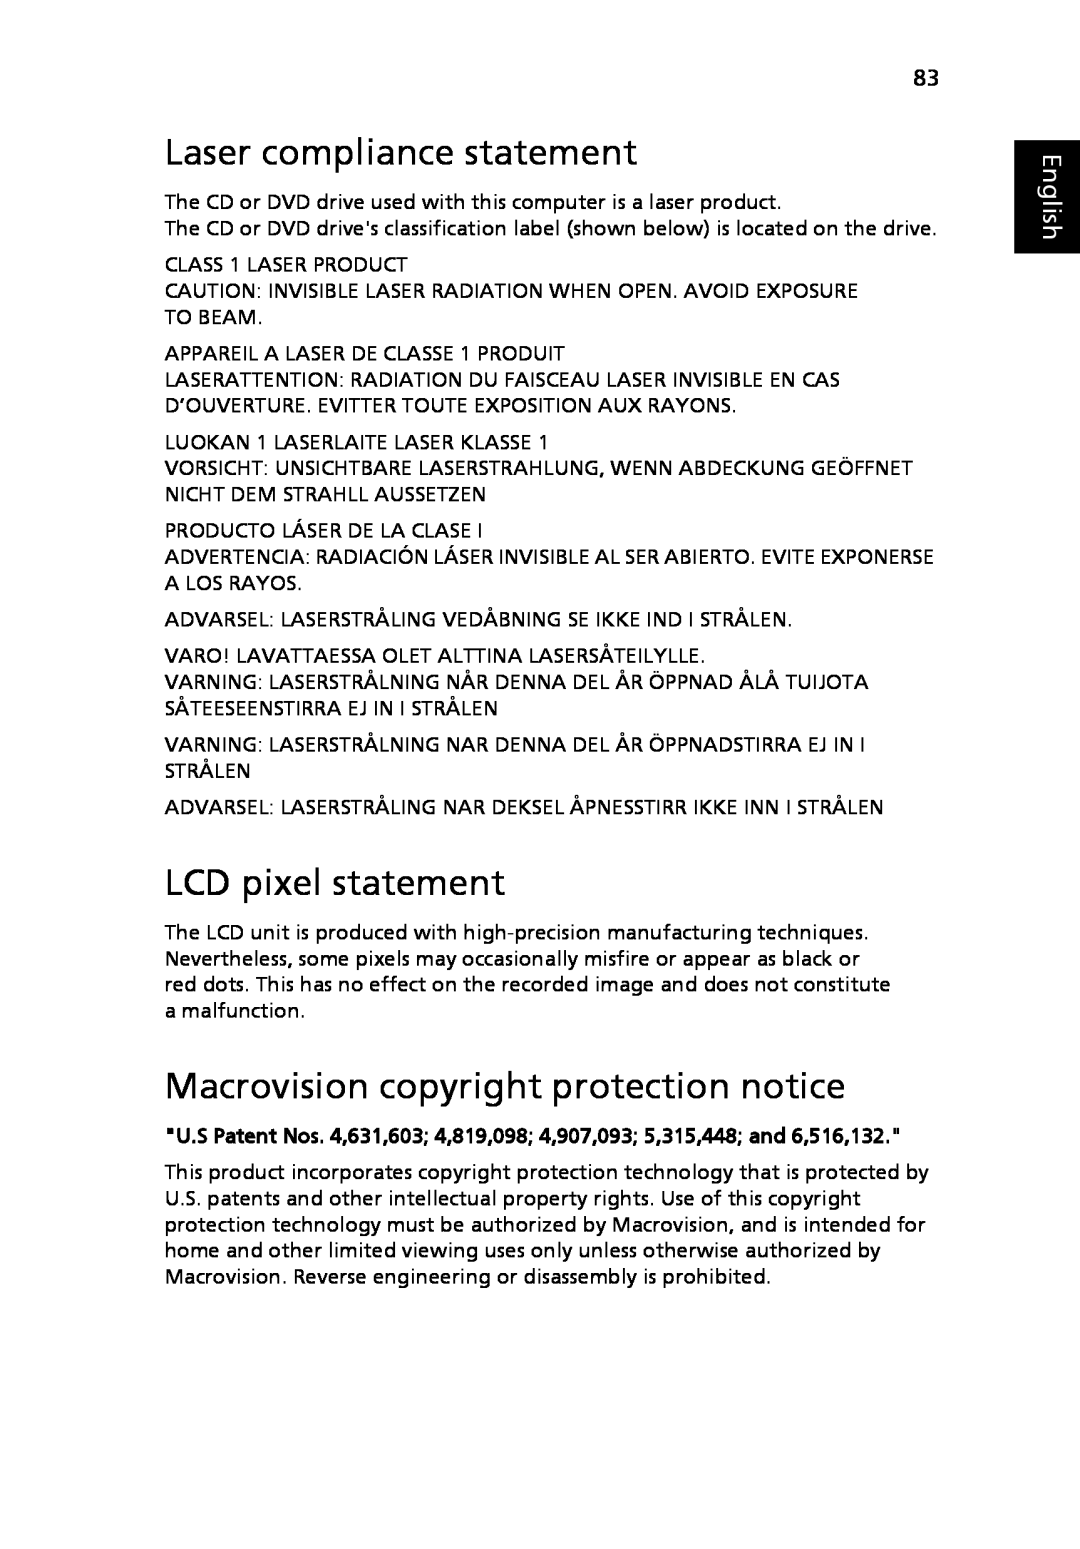 Acer MS2219, 4920 manual Laser compliance statement, LCD pixel statement, Macrovision copyright protection notice, English 